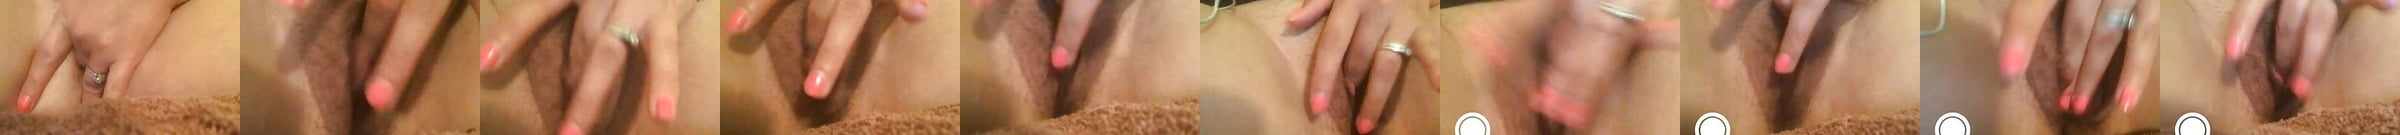 Facetime Fucking With My Slutty Wife Hd Porn 28 Xhamster Xhamster